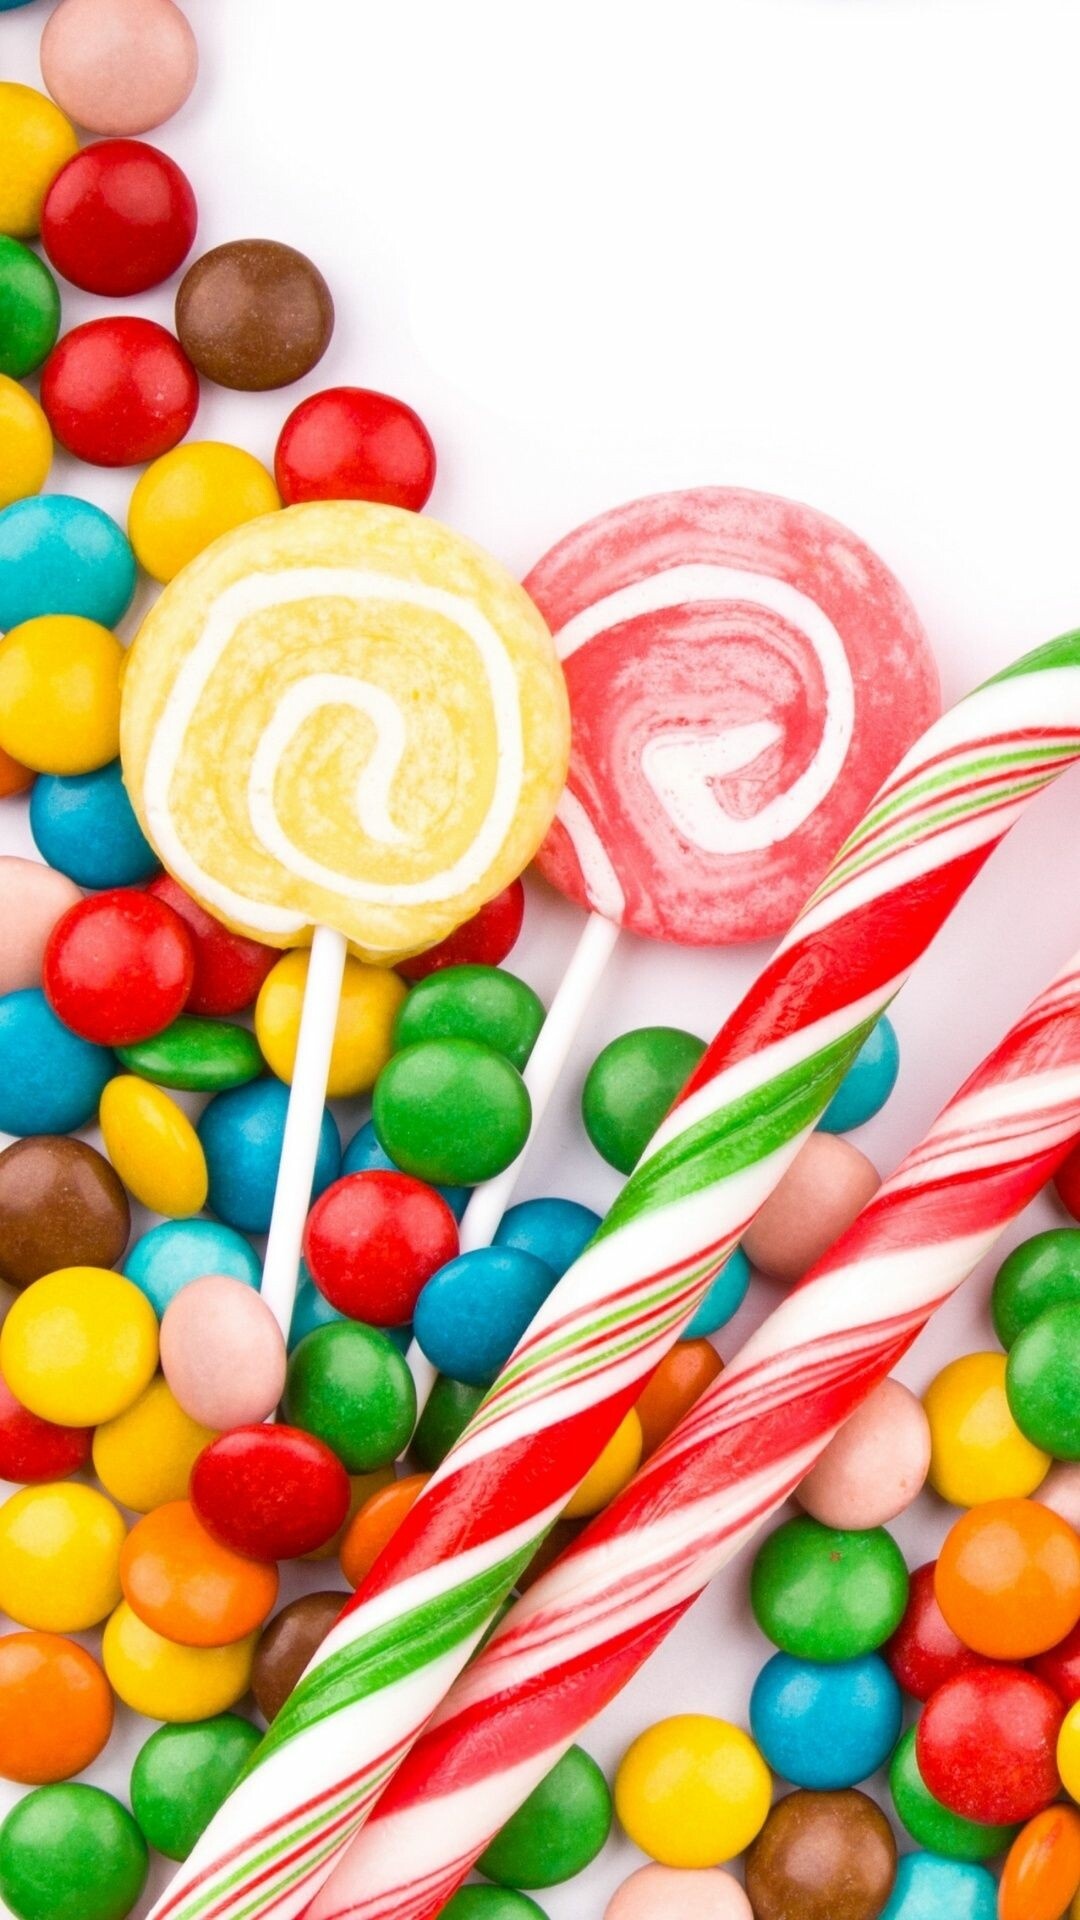 Colorful candy wallpapers, Sweet and vibrant, Eye-catching designs, Sugary cravings, 1080x1920 Full HD Handy